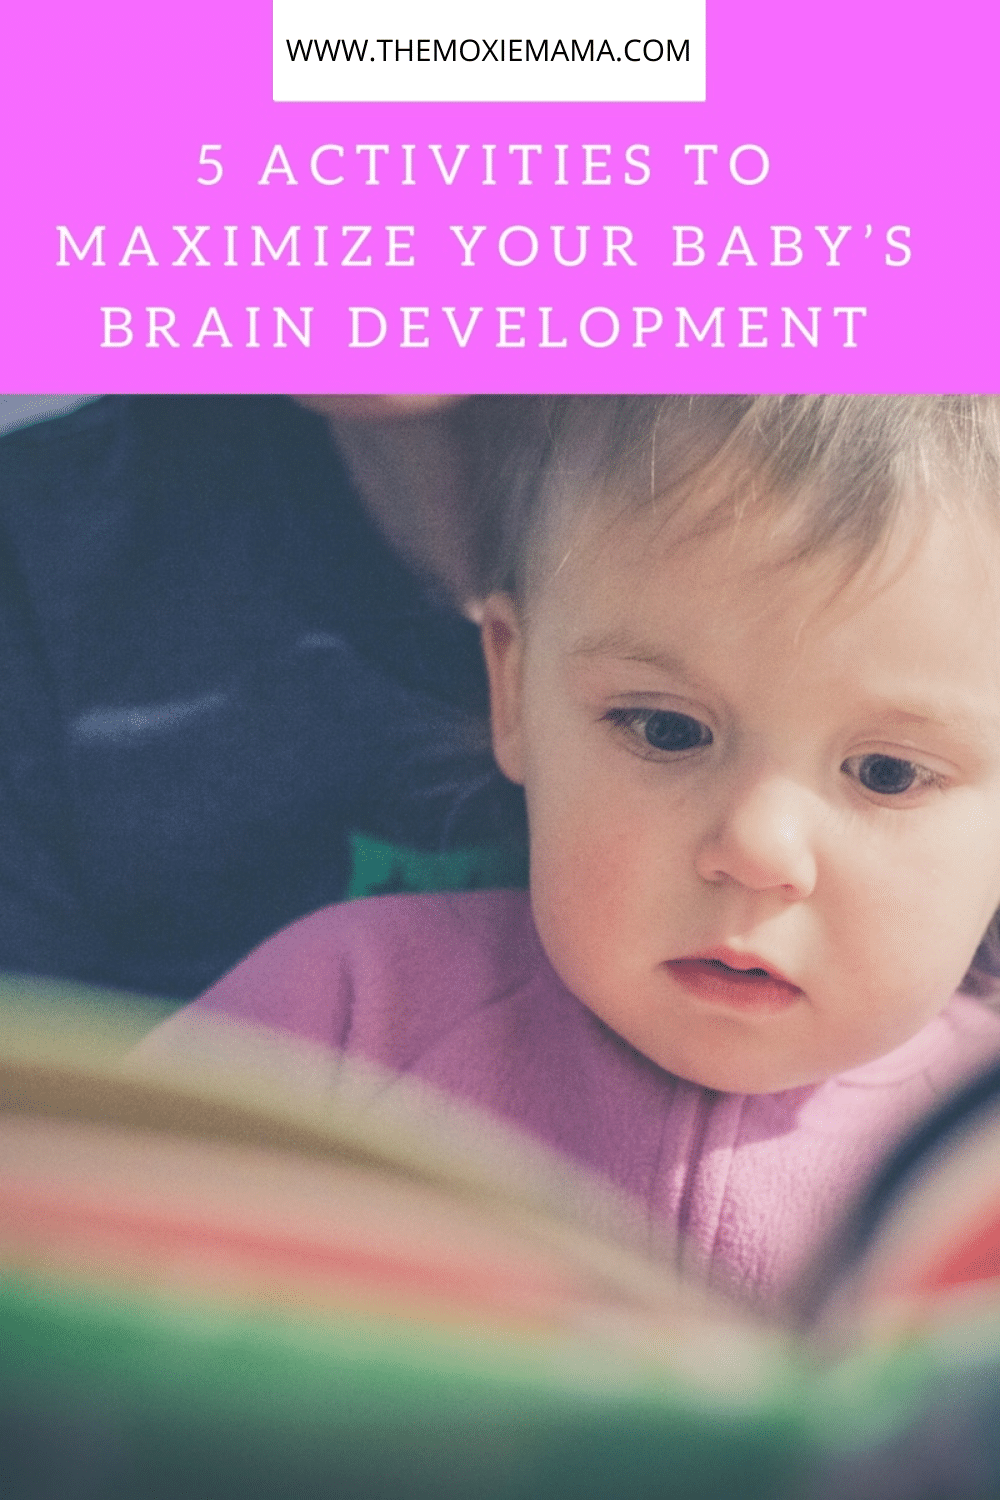 Here are five activities that you can do with your child to maximize learning and brain development.